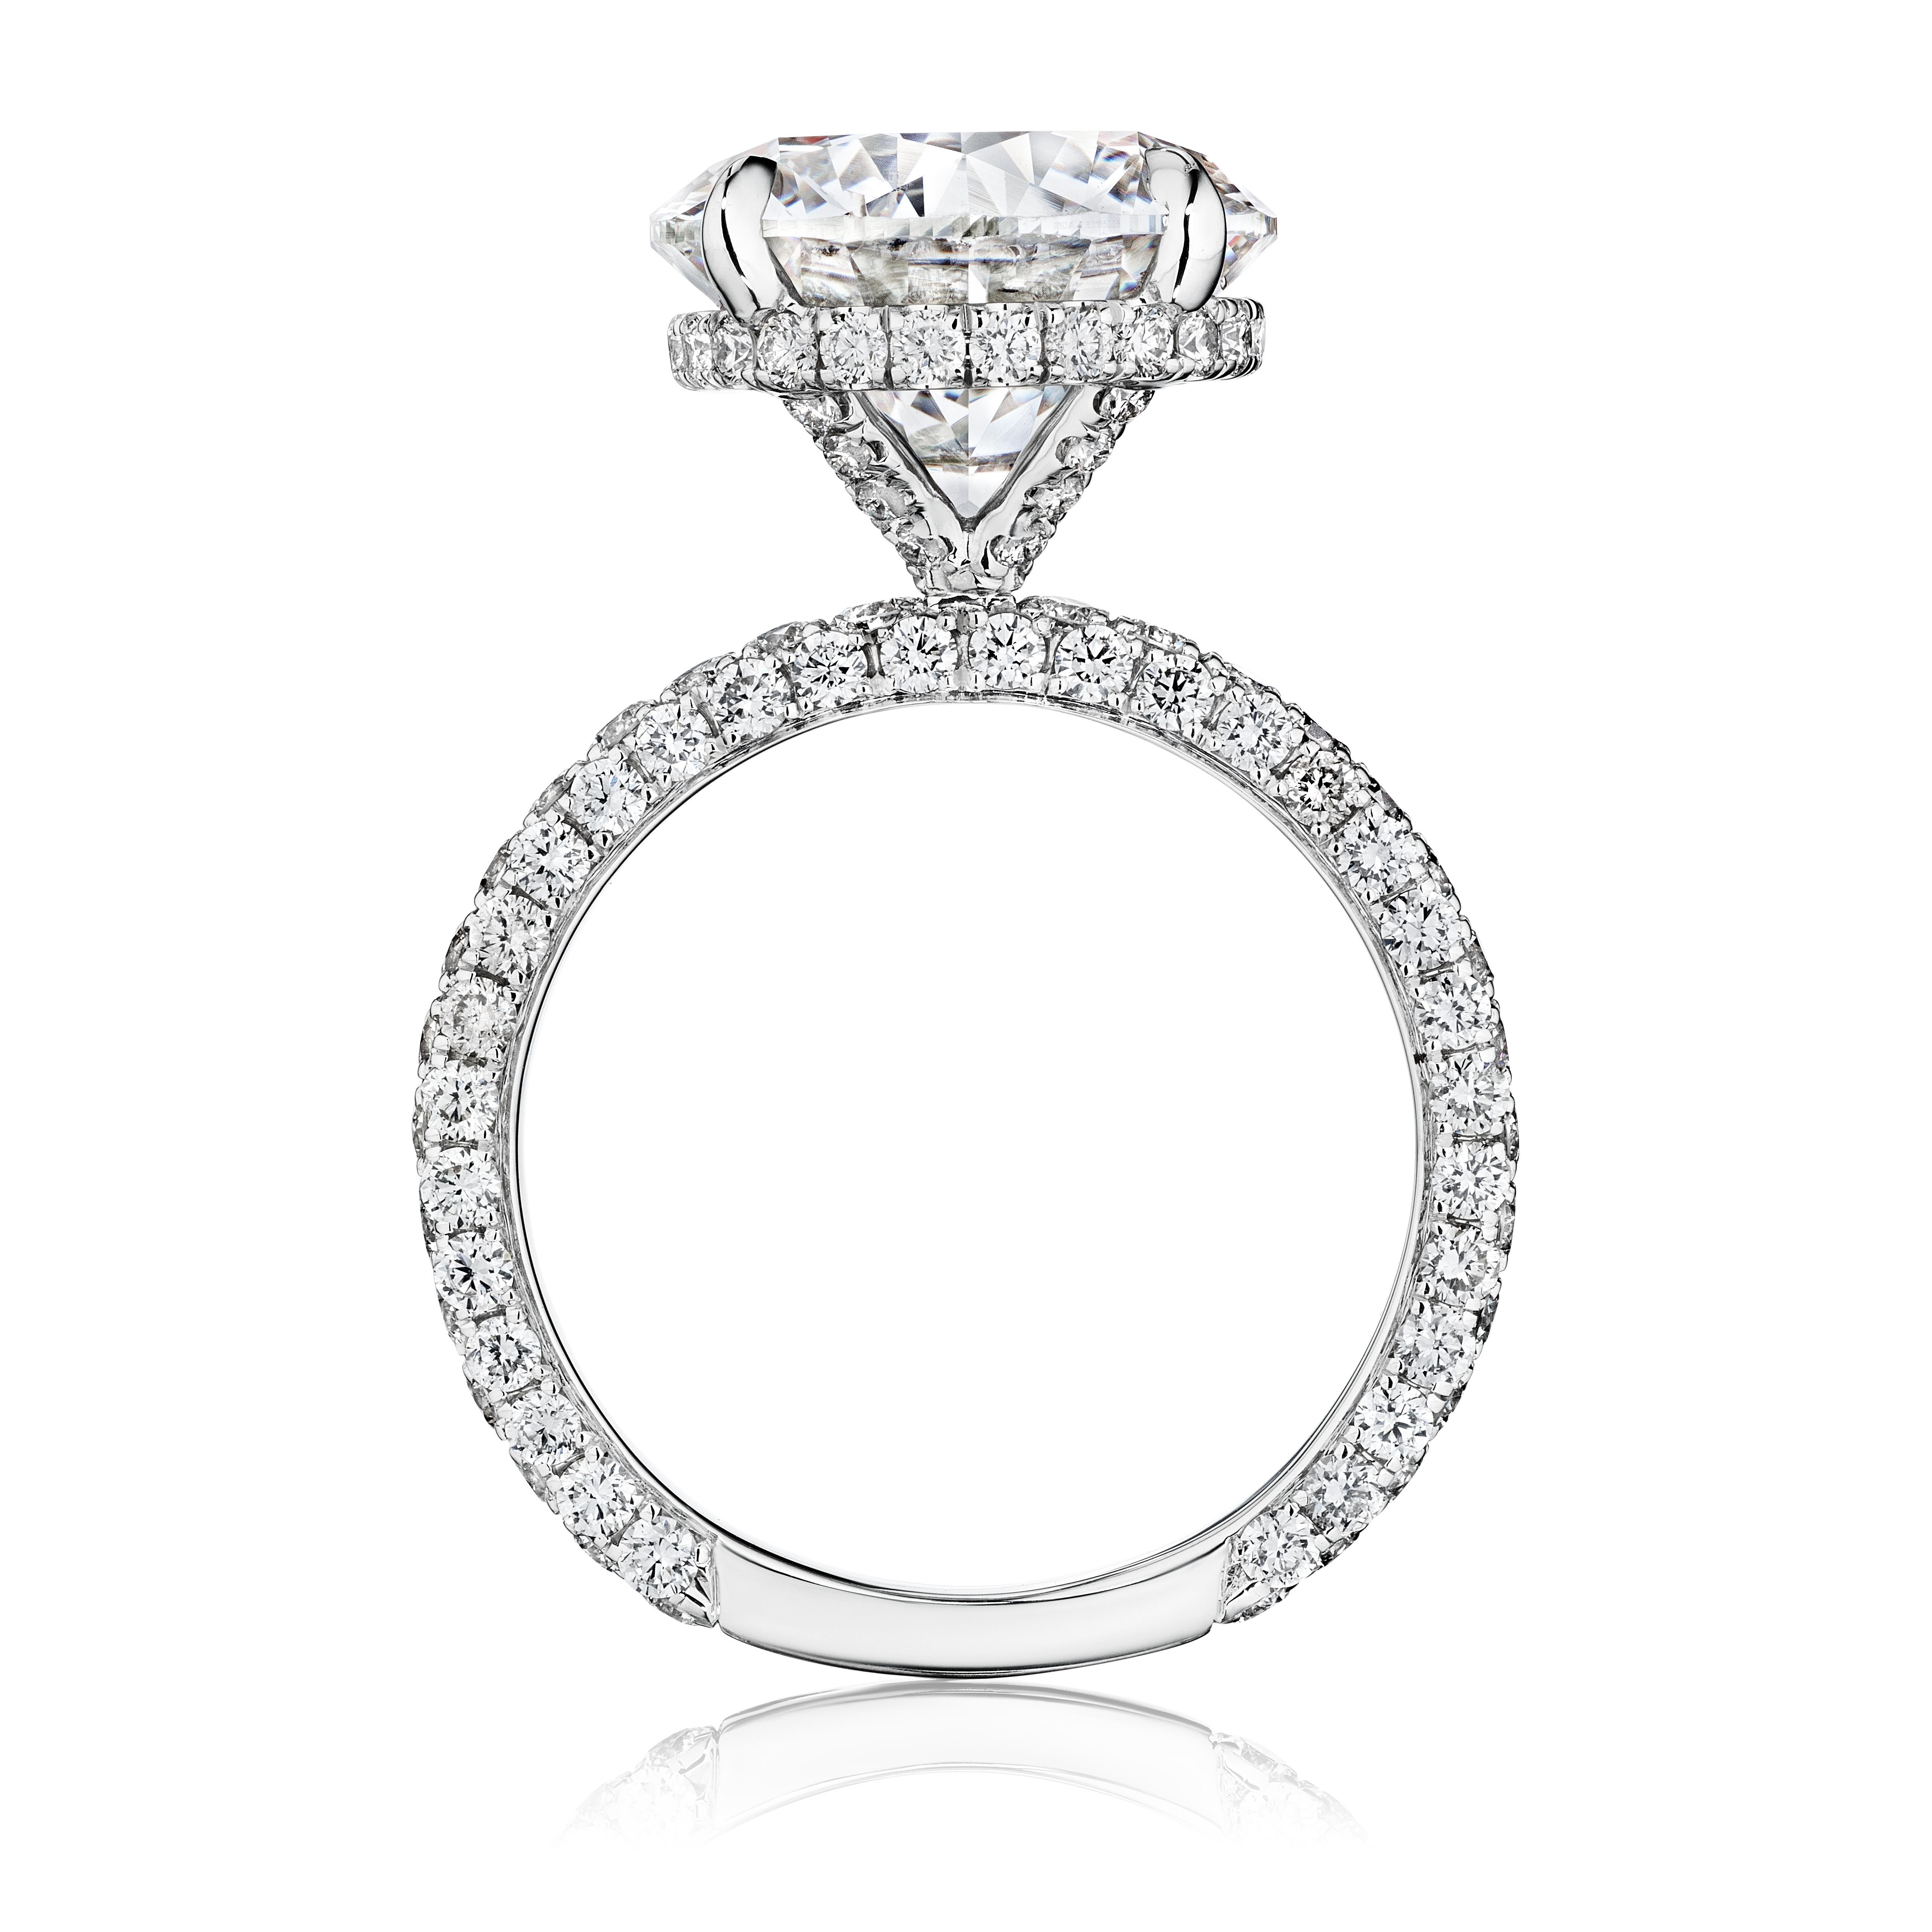 Meet 'Catherine,' a paragon of splendor, this engagement ring is graced with a GIA Certified 5.00 Carat Round Diamond, epitomizing timeless elegance. The round brilliant diamond, renowned for its classic appeal and unparalleled brilliance, is